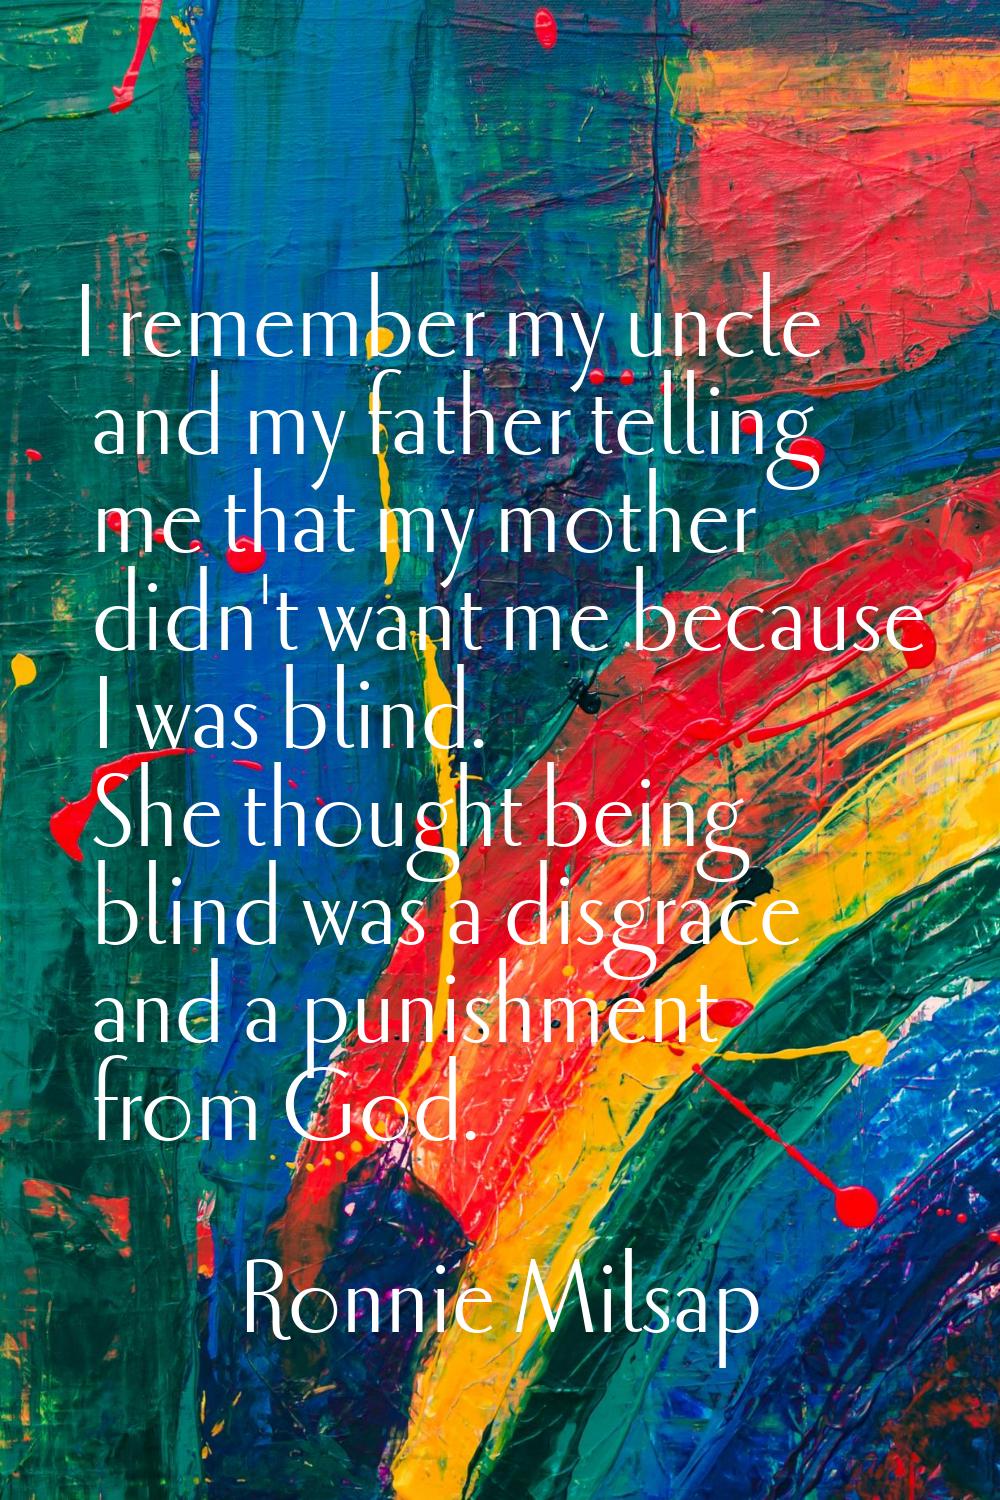 I remember my uncle and my father telling me that my mother didn't want me because I was blind. She